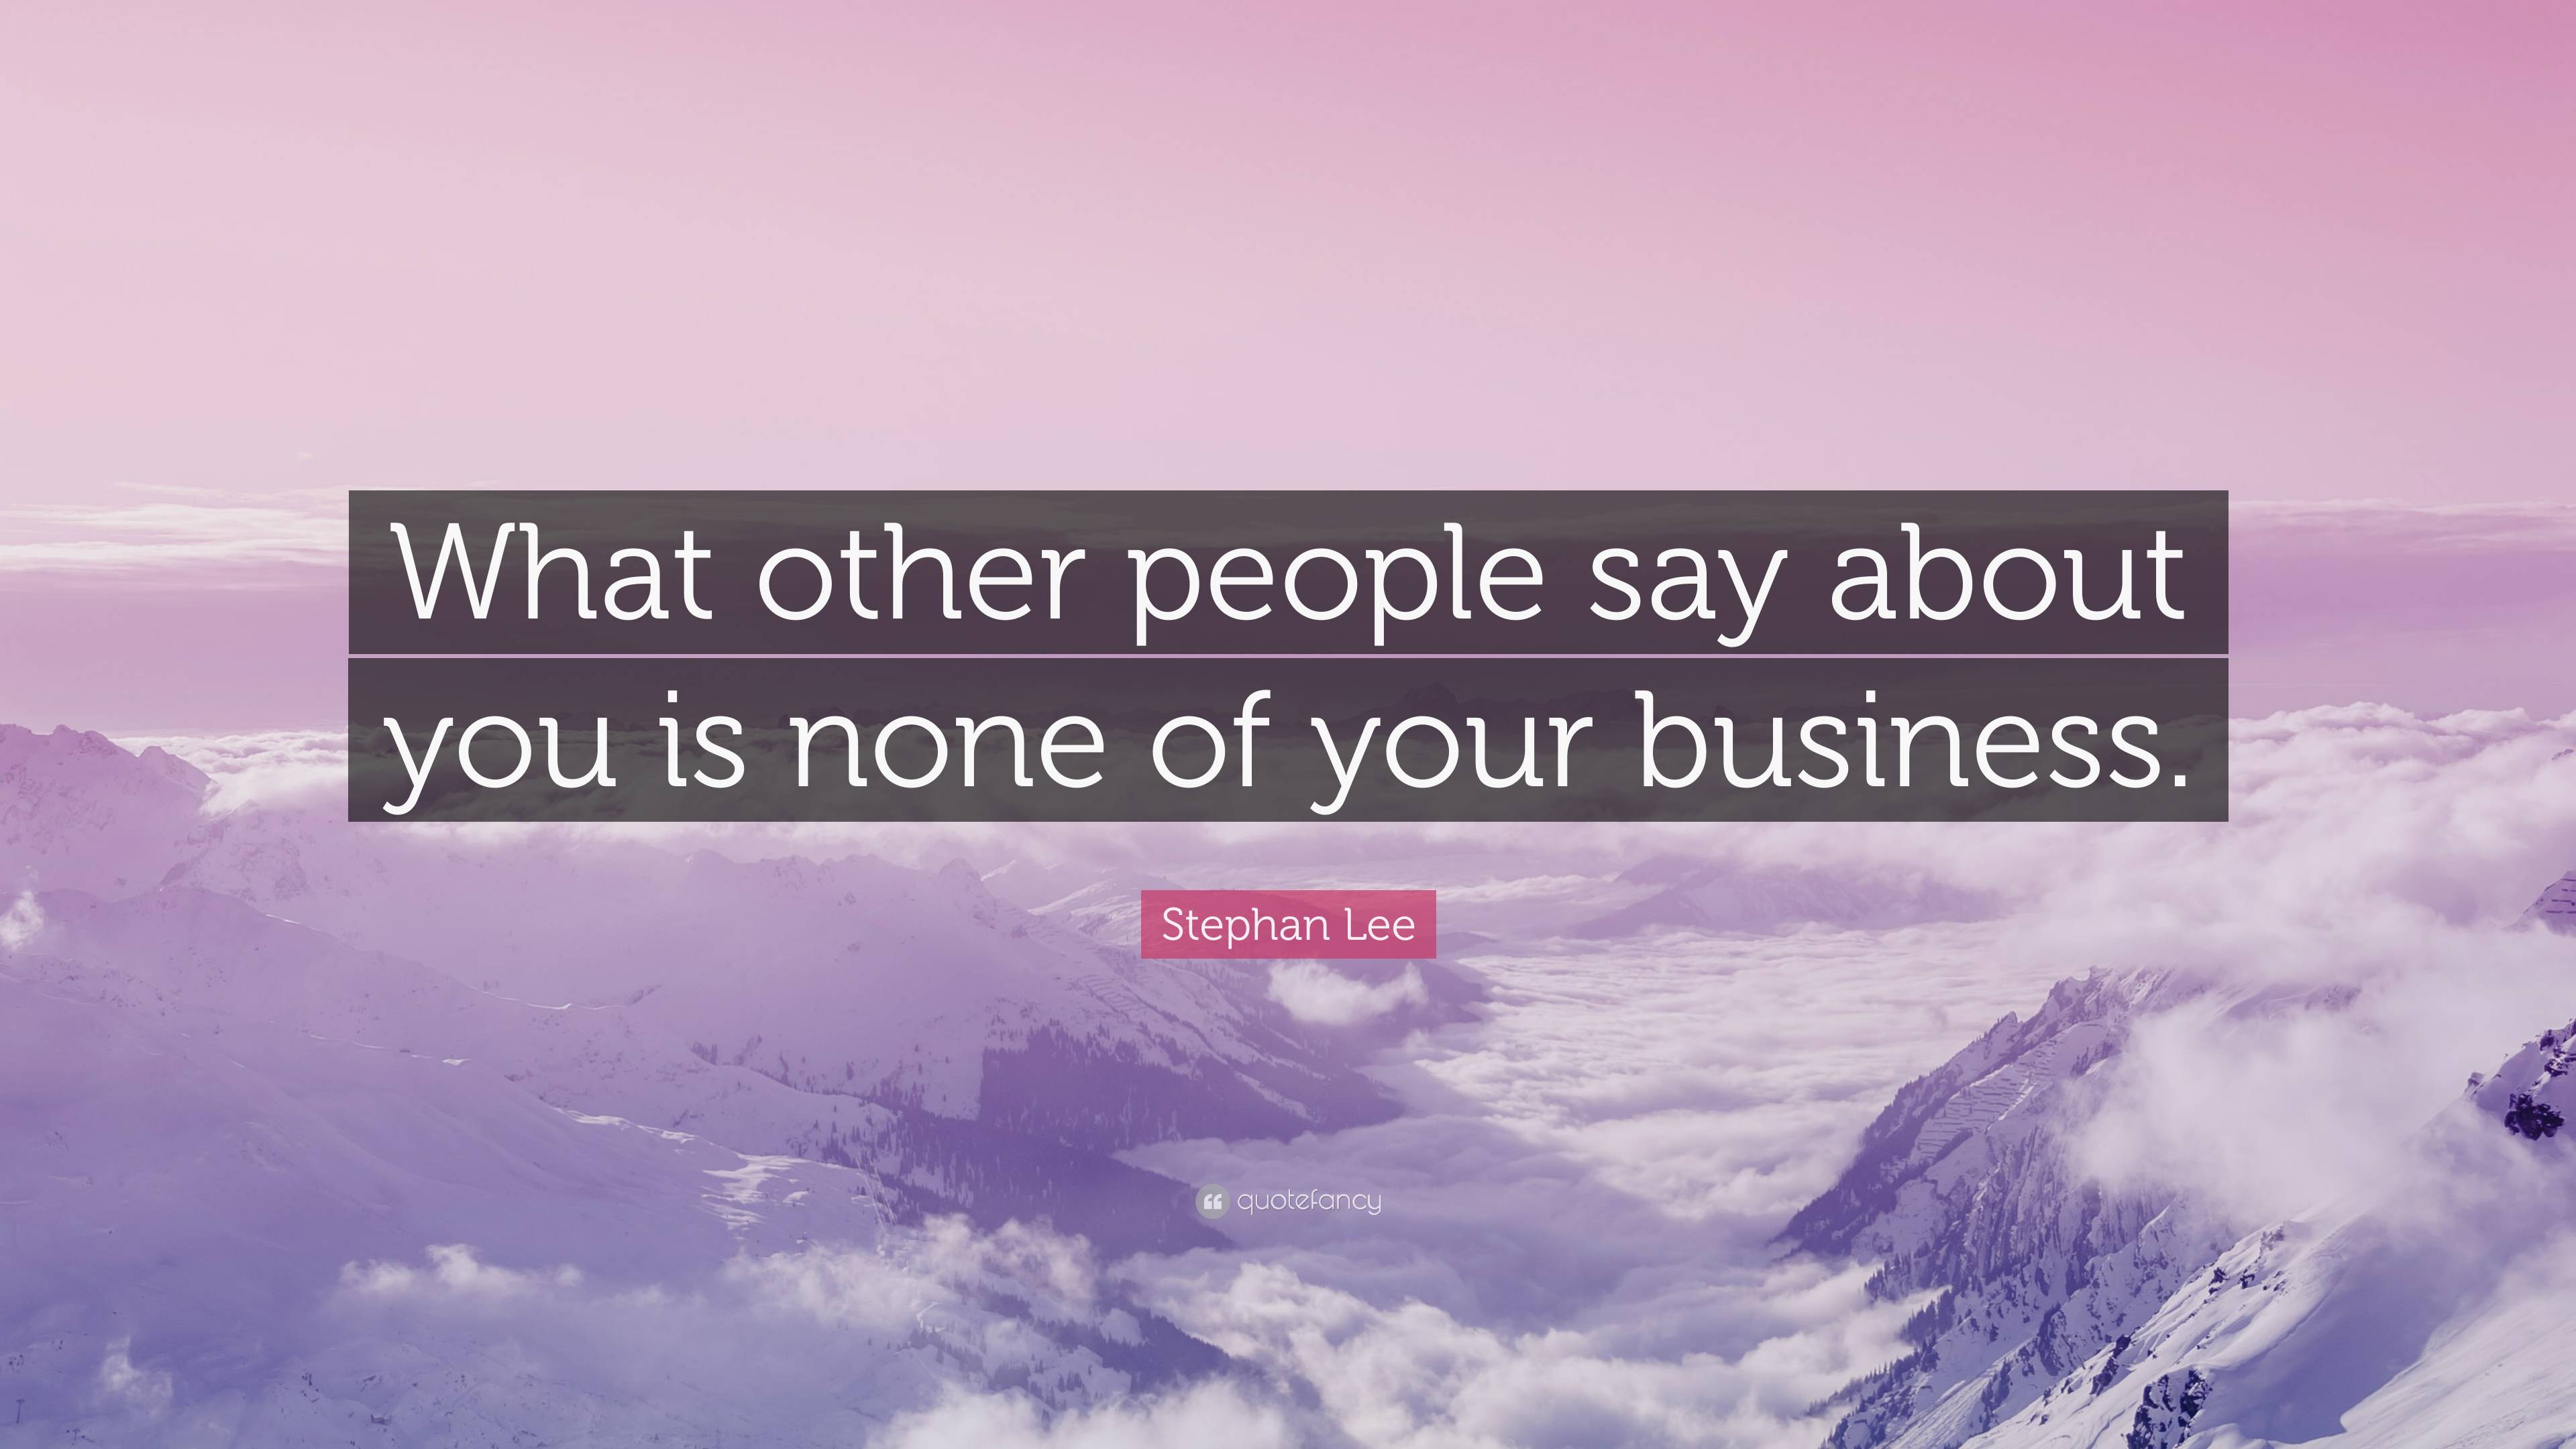 Stephan Lee Quote: “What other people say about you is none of your ...